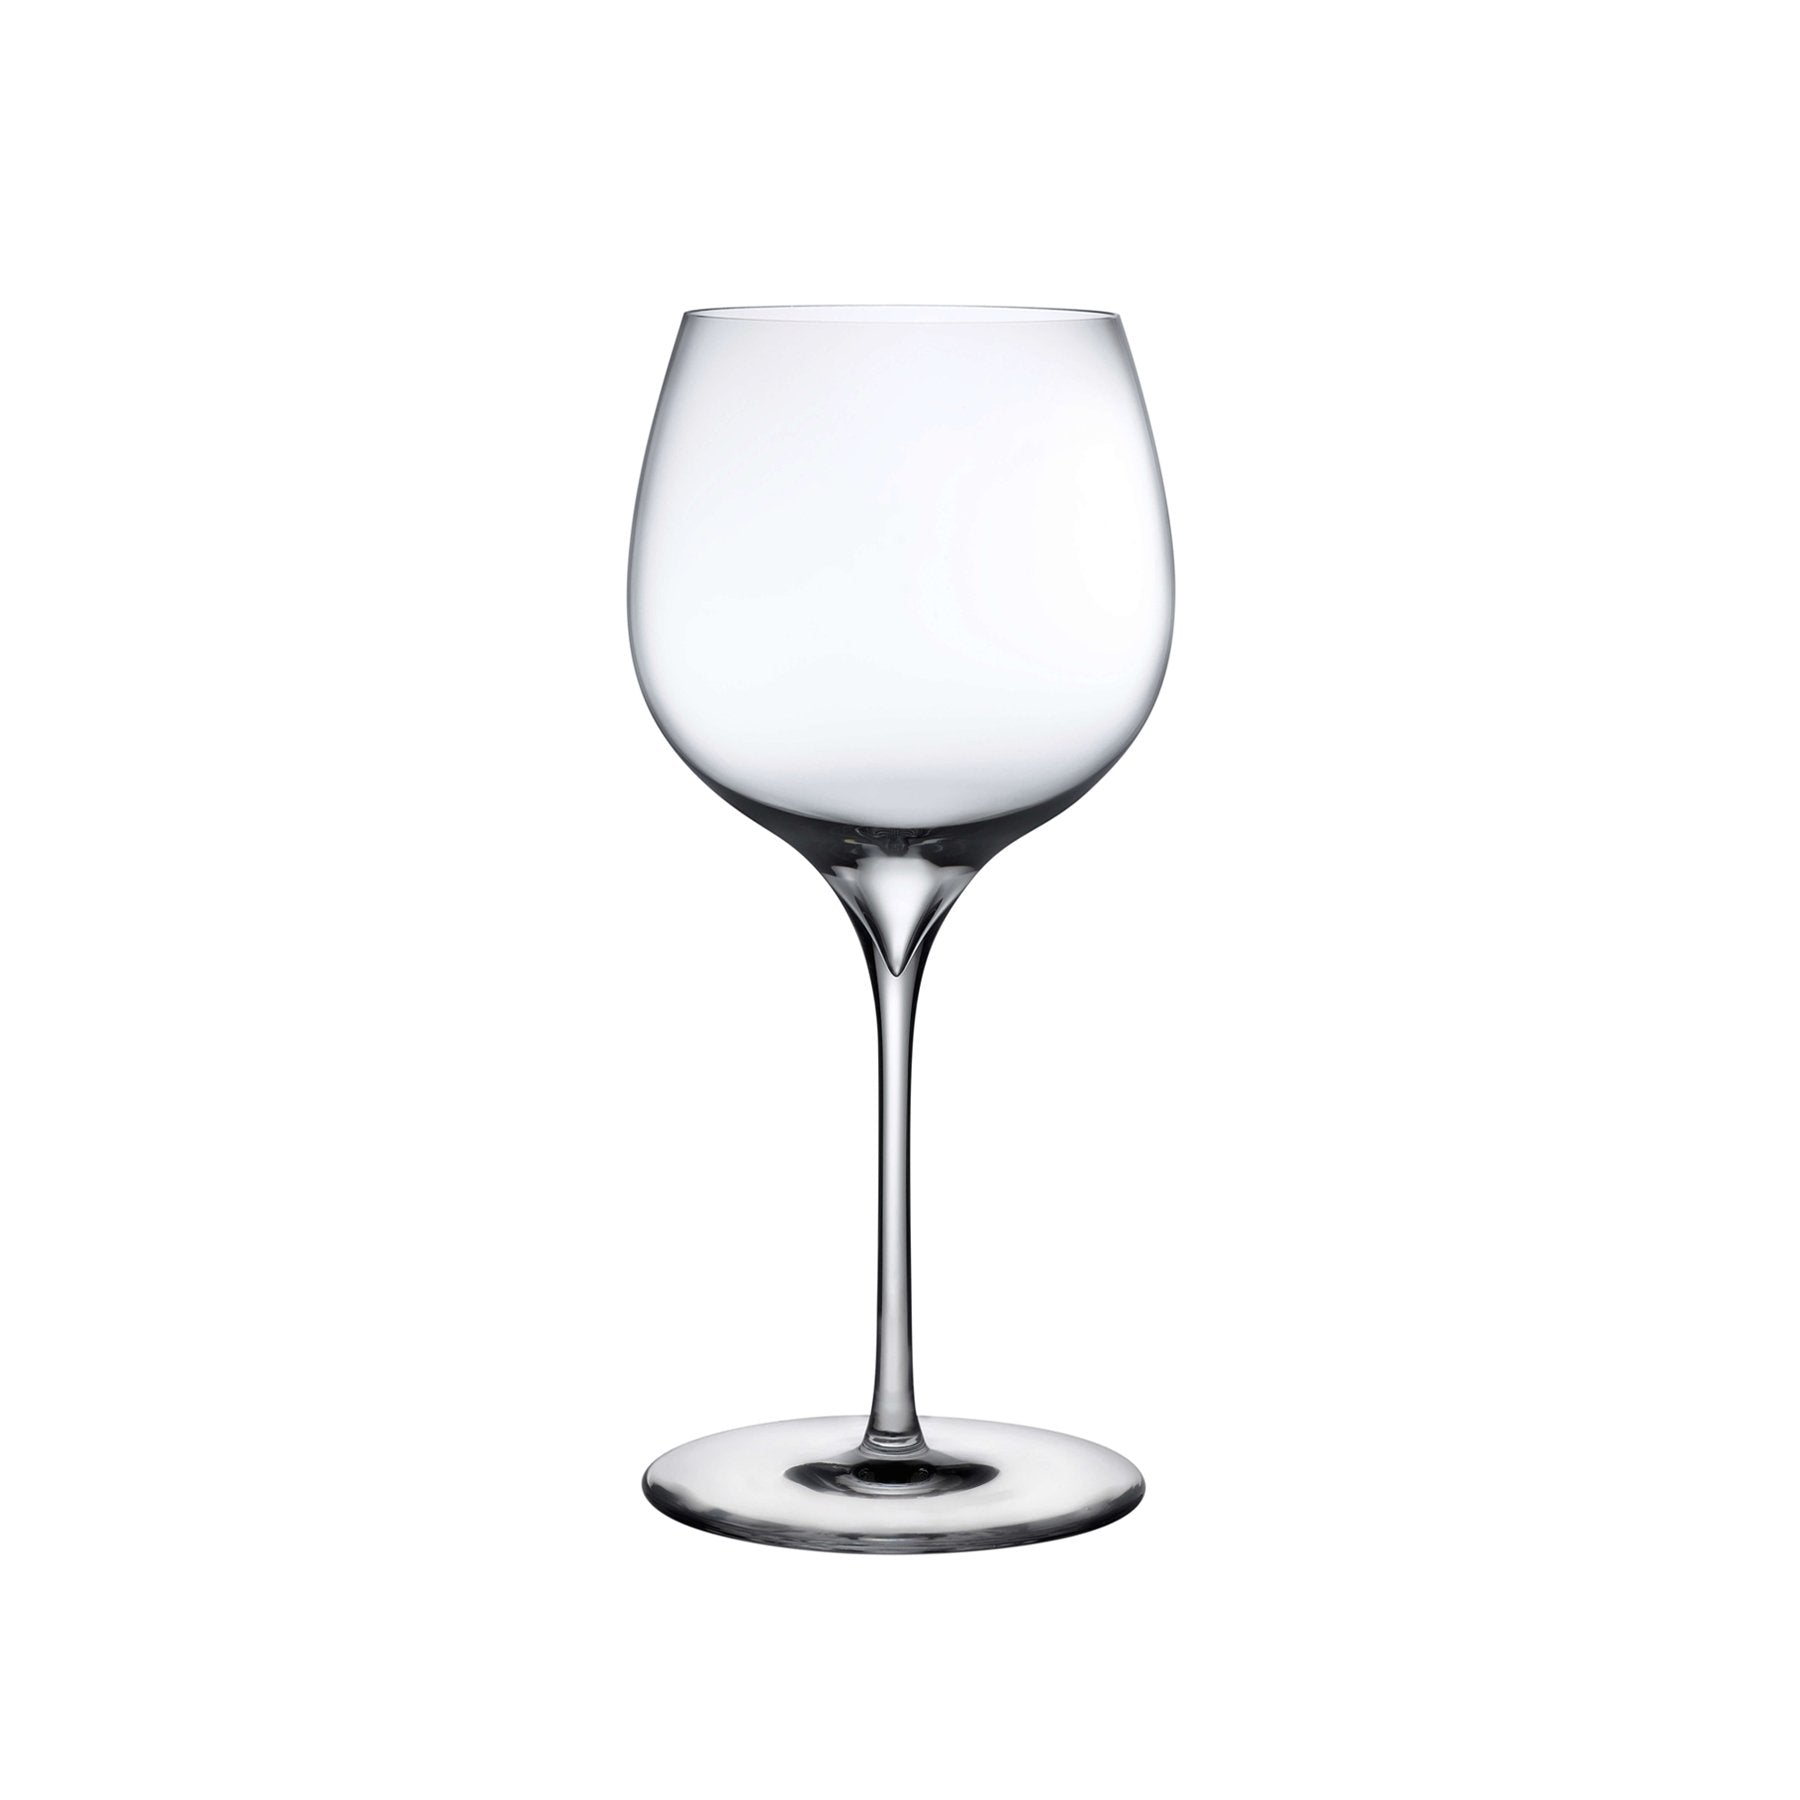 Nude Glass - Round Up White Wine Glasses - Set of 2 Dusty Rose